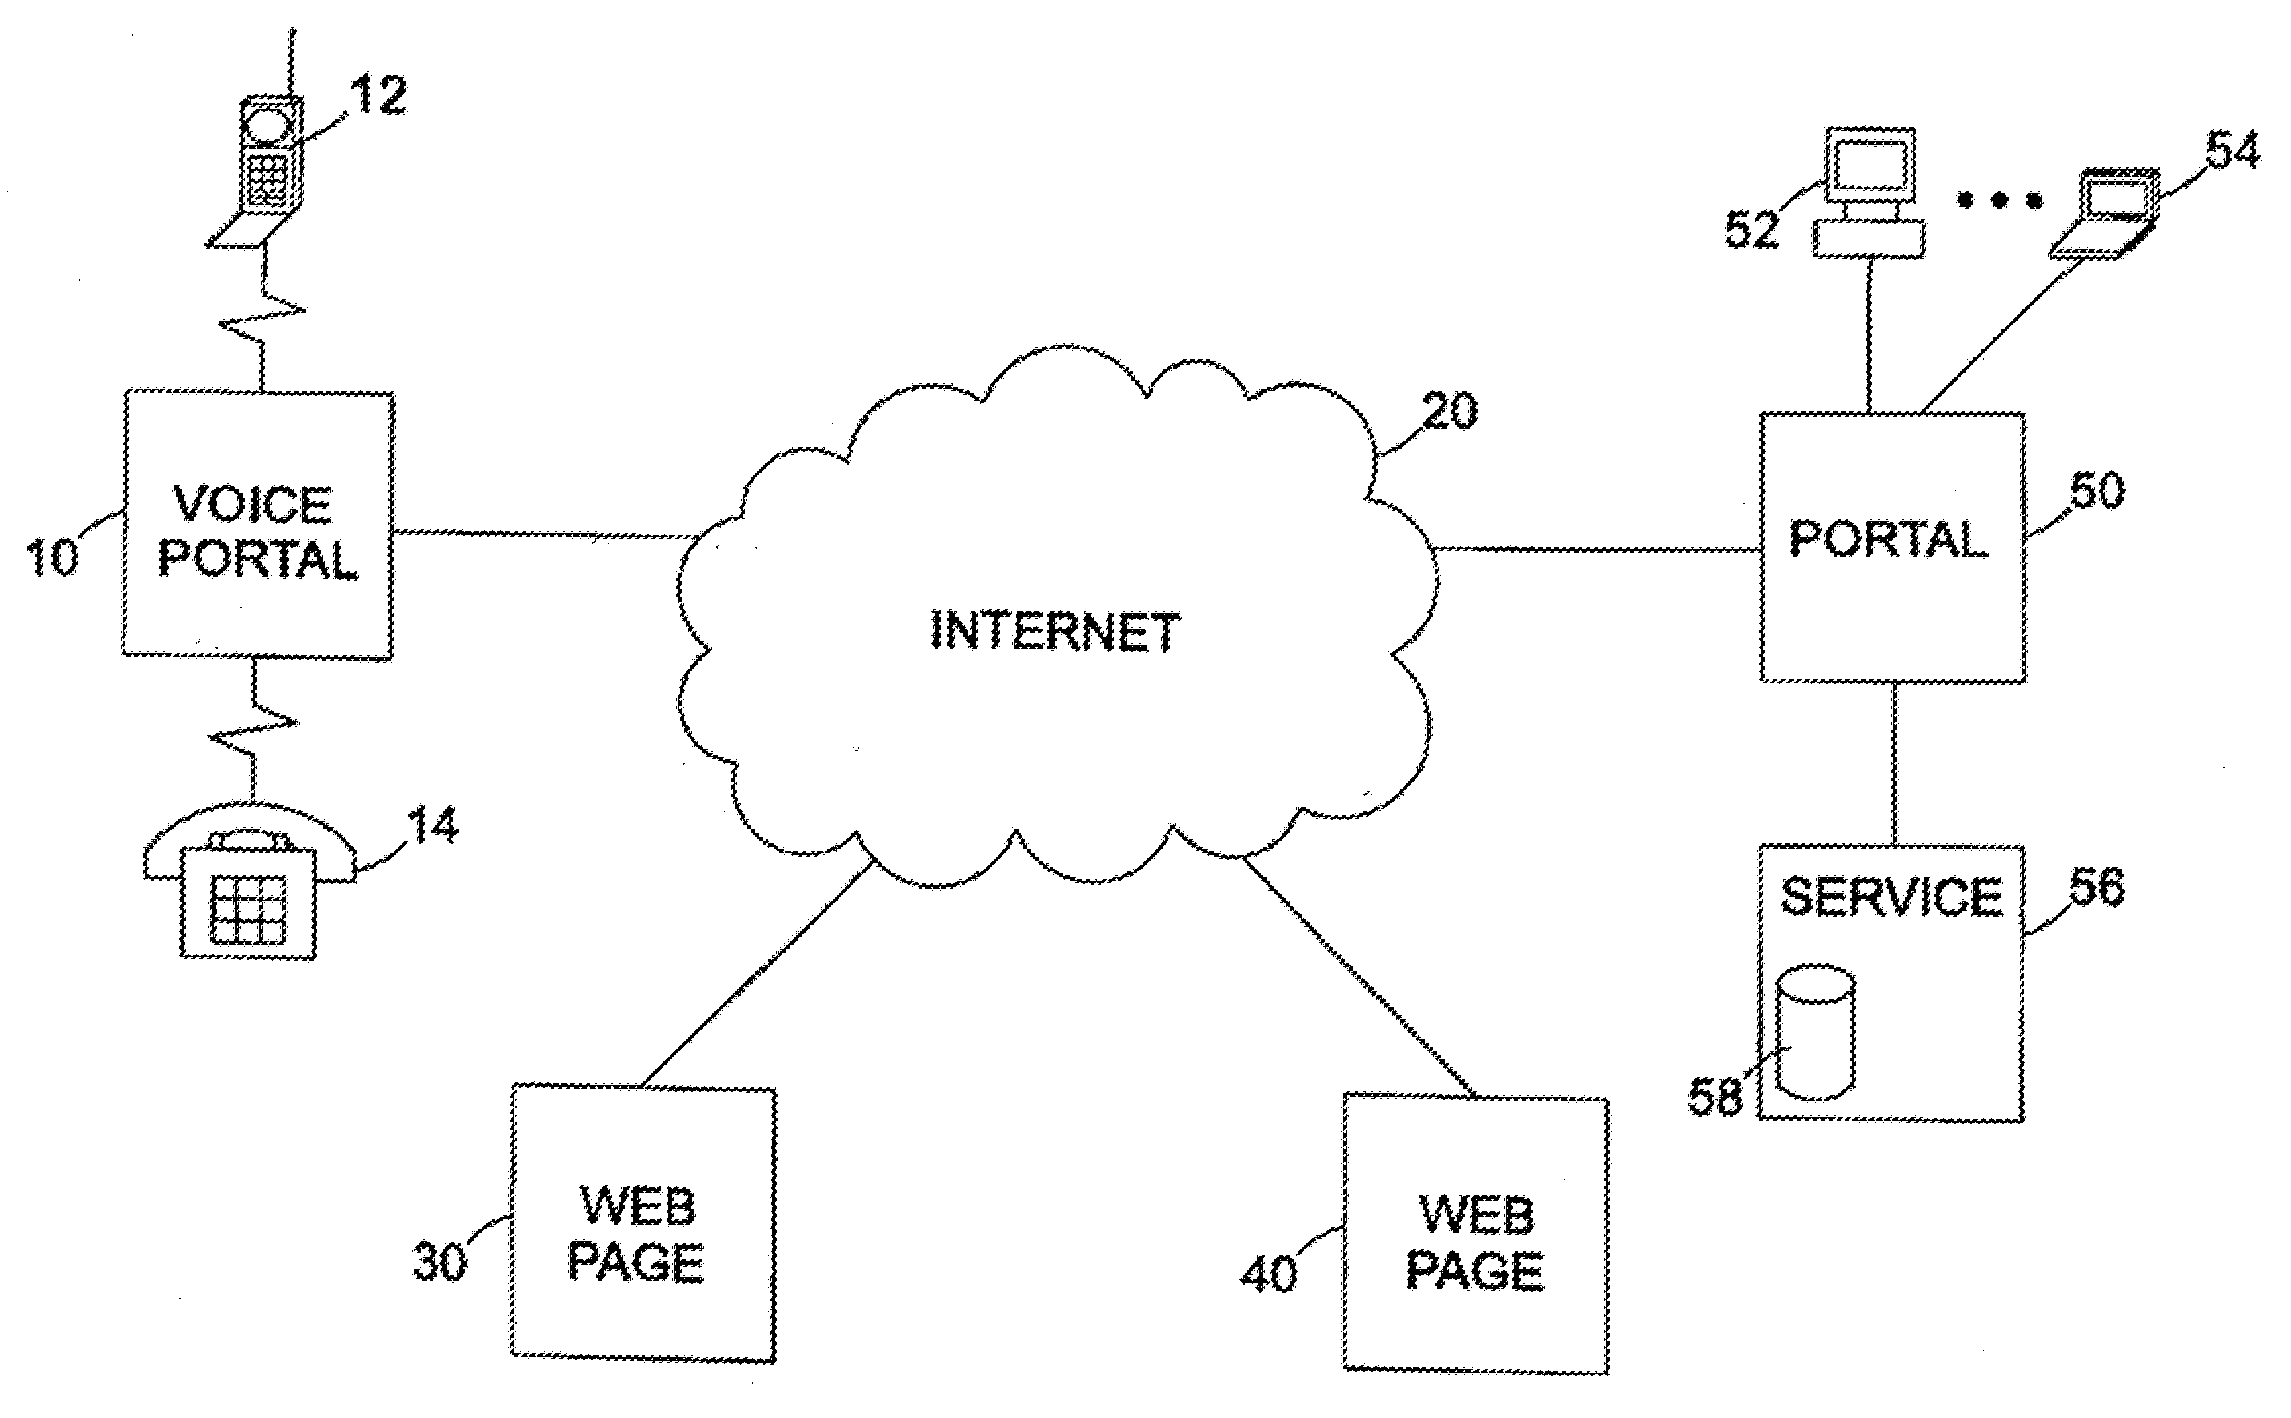 System and Method for the Transformation and Canonicalization of Semantically Structured Data